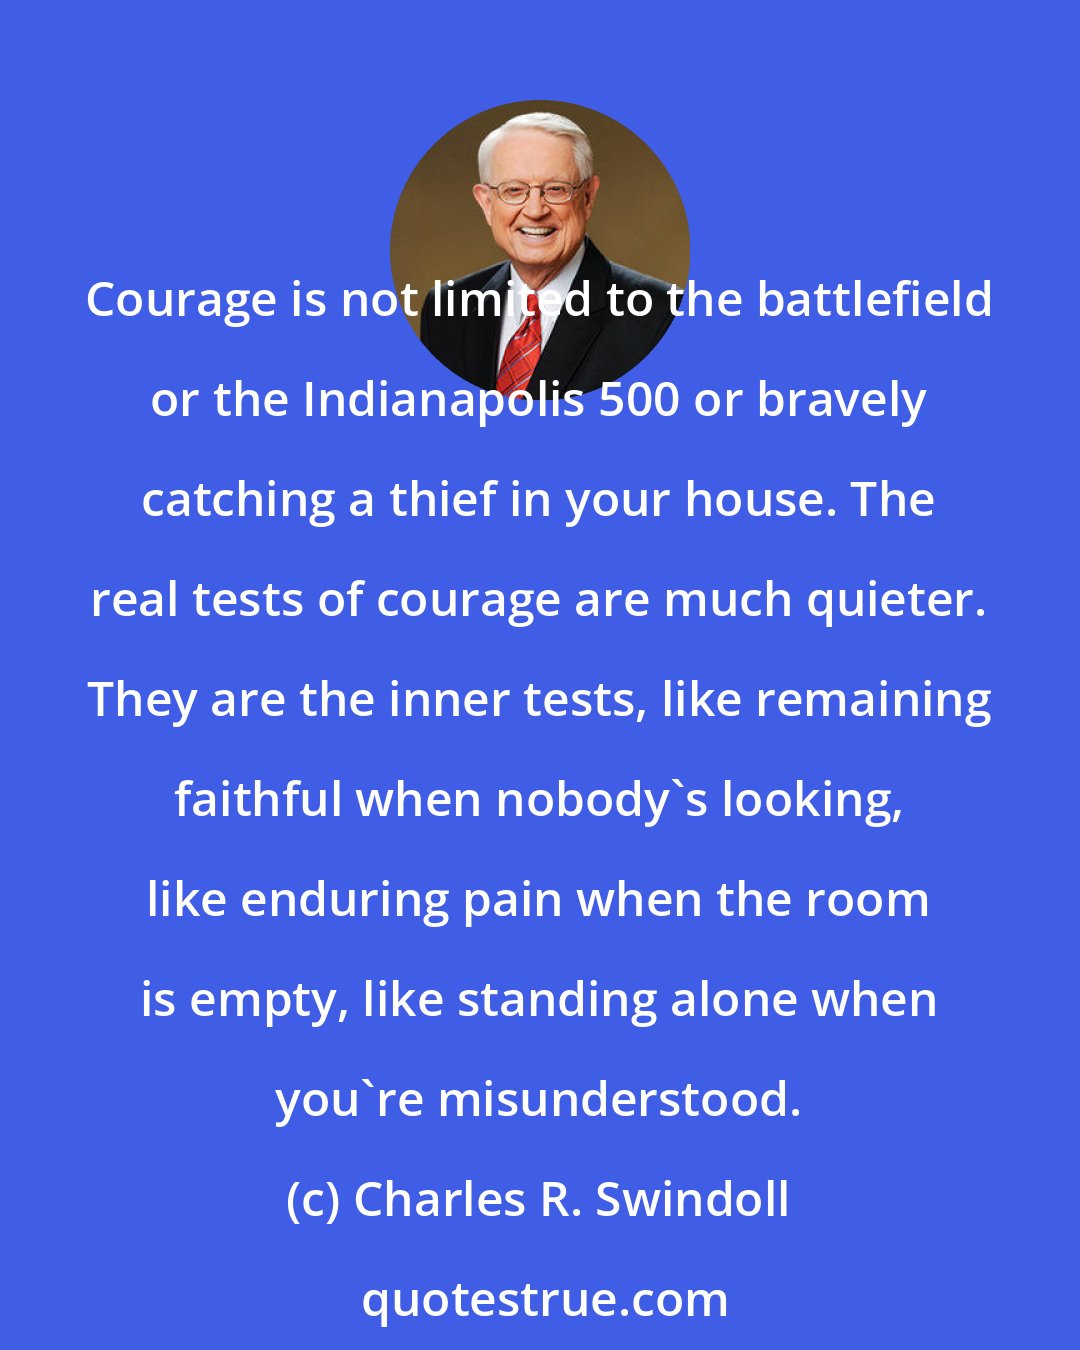 Charles R. Swindoll: Courage is not limited to the battlefield or the Indianapolis 500 or bravely catching a thief in your house. The real tests of courage are much quieter. They are the inner tests, like remaining faithful when nobody's looking, like enduring pain when the room is empty, like standing alone when you're misunderstood.